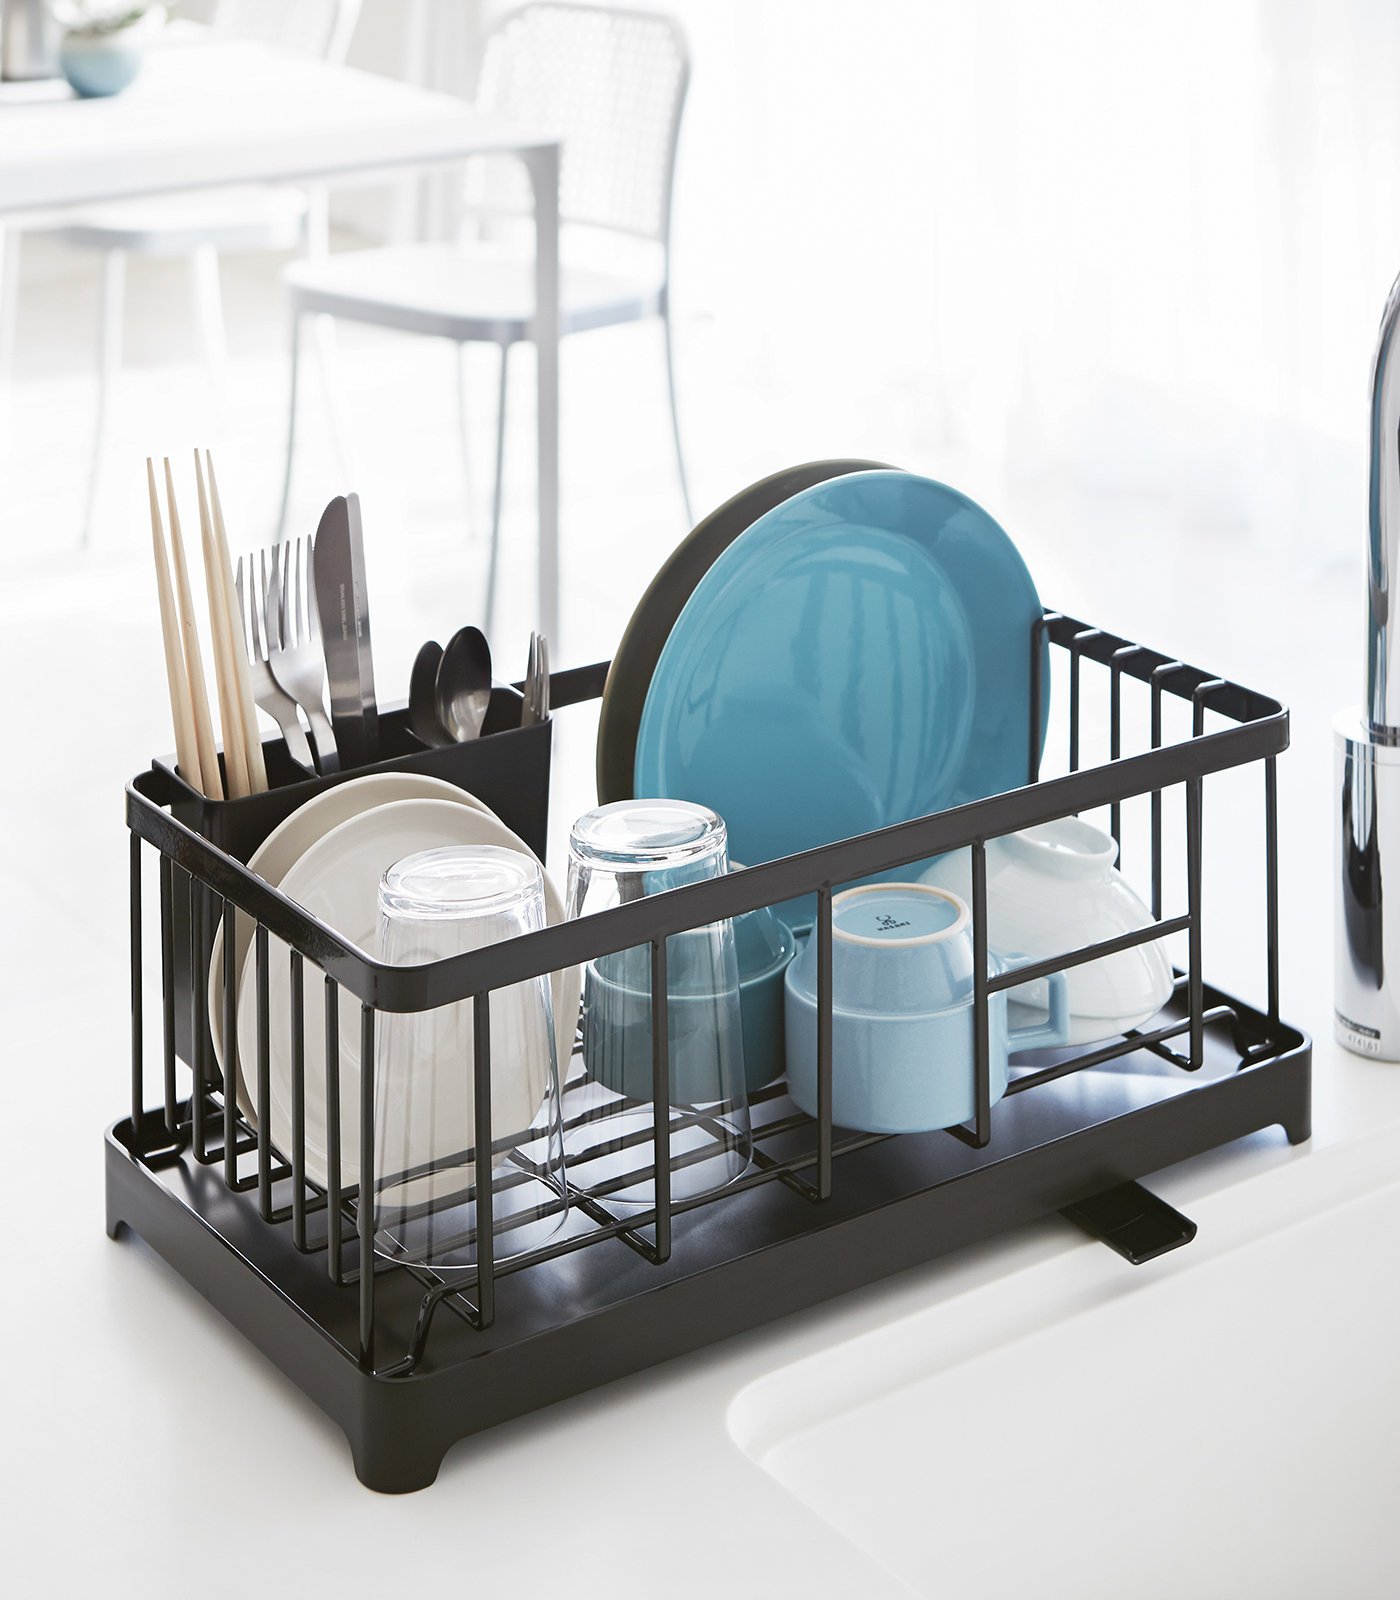 Commercial Dish Racks Small Wire Drainer Drying Rack Kitchen With Removable   for sale online